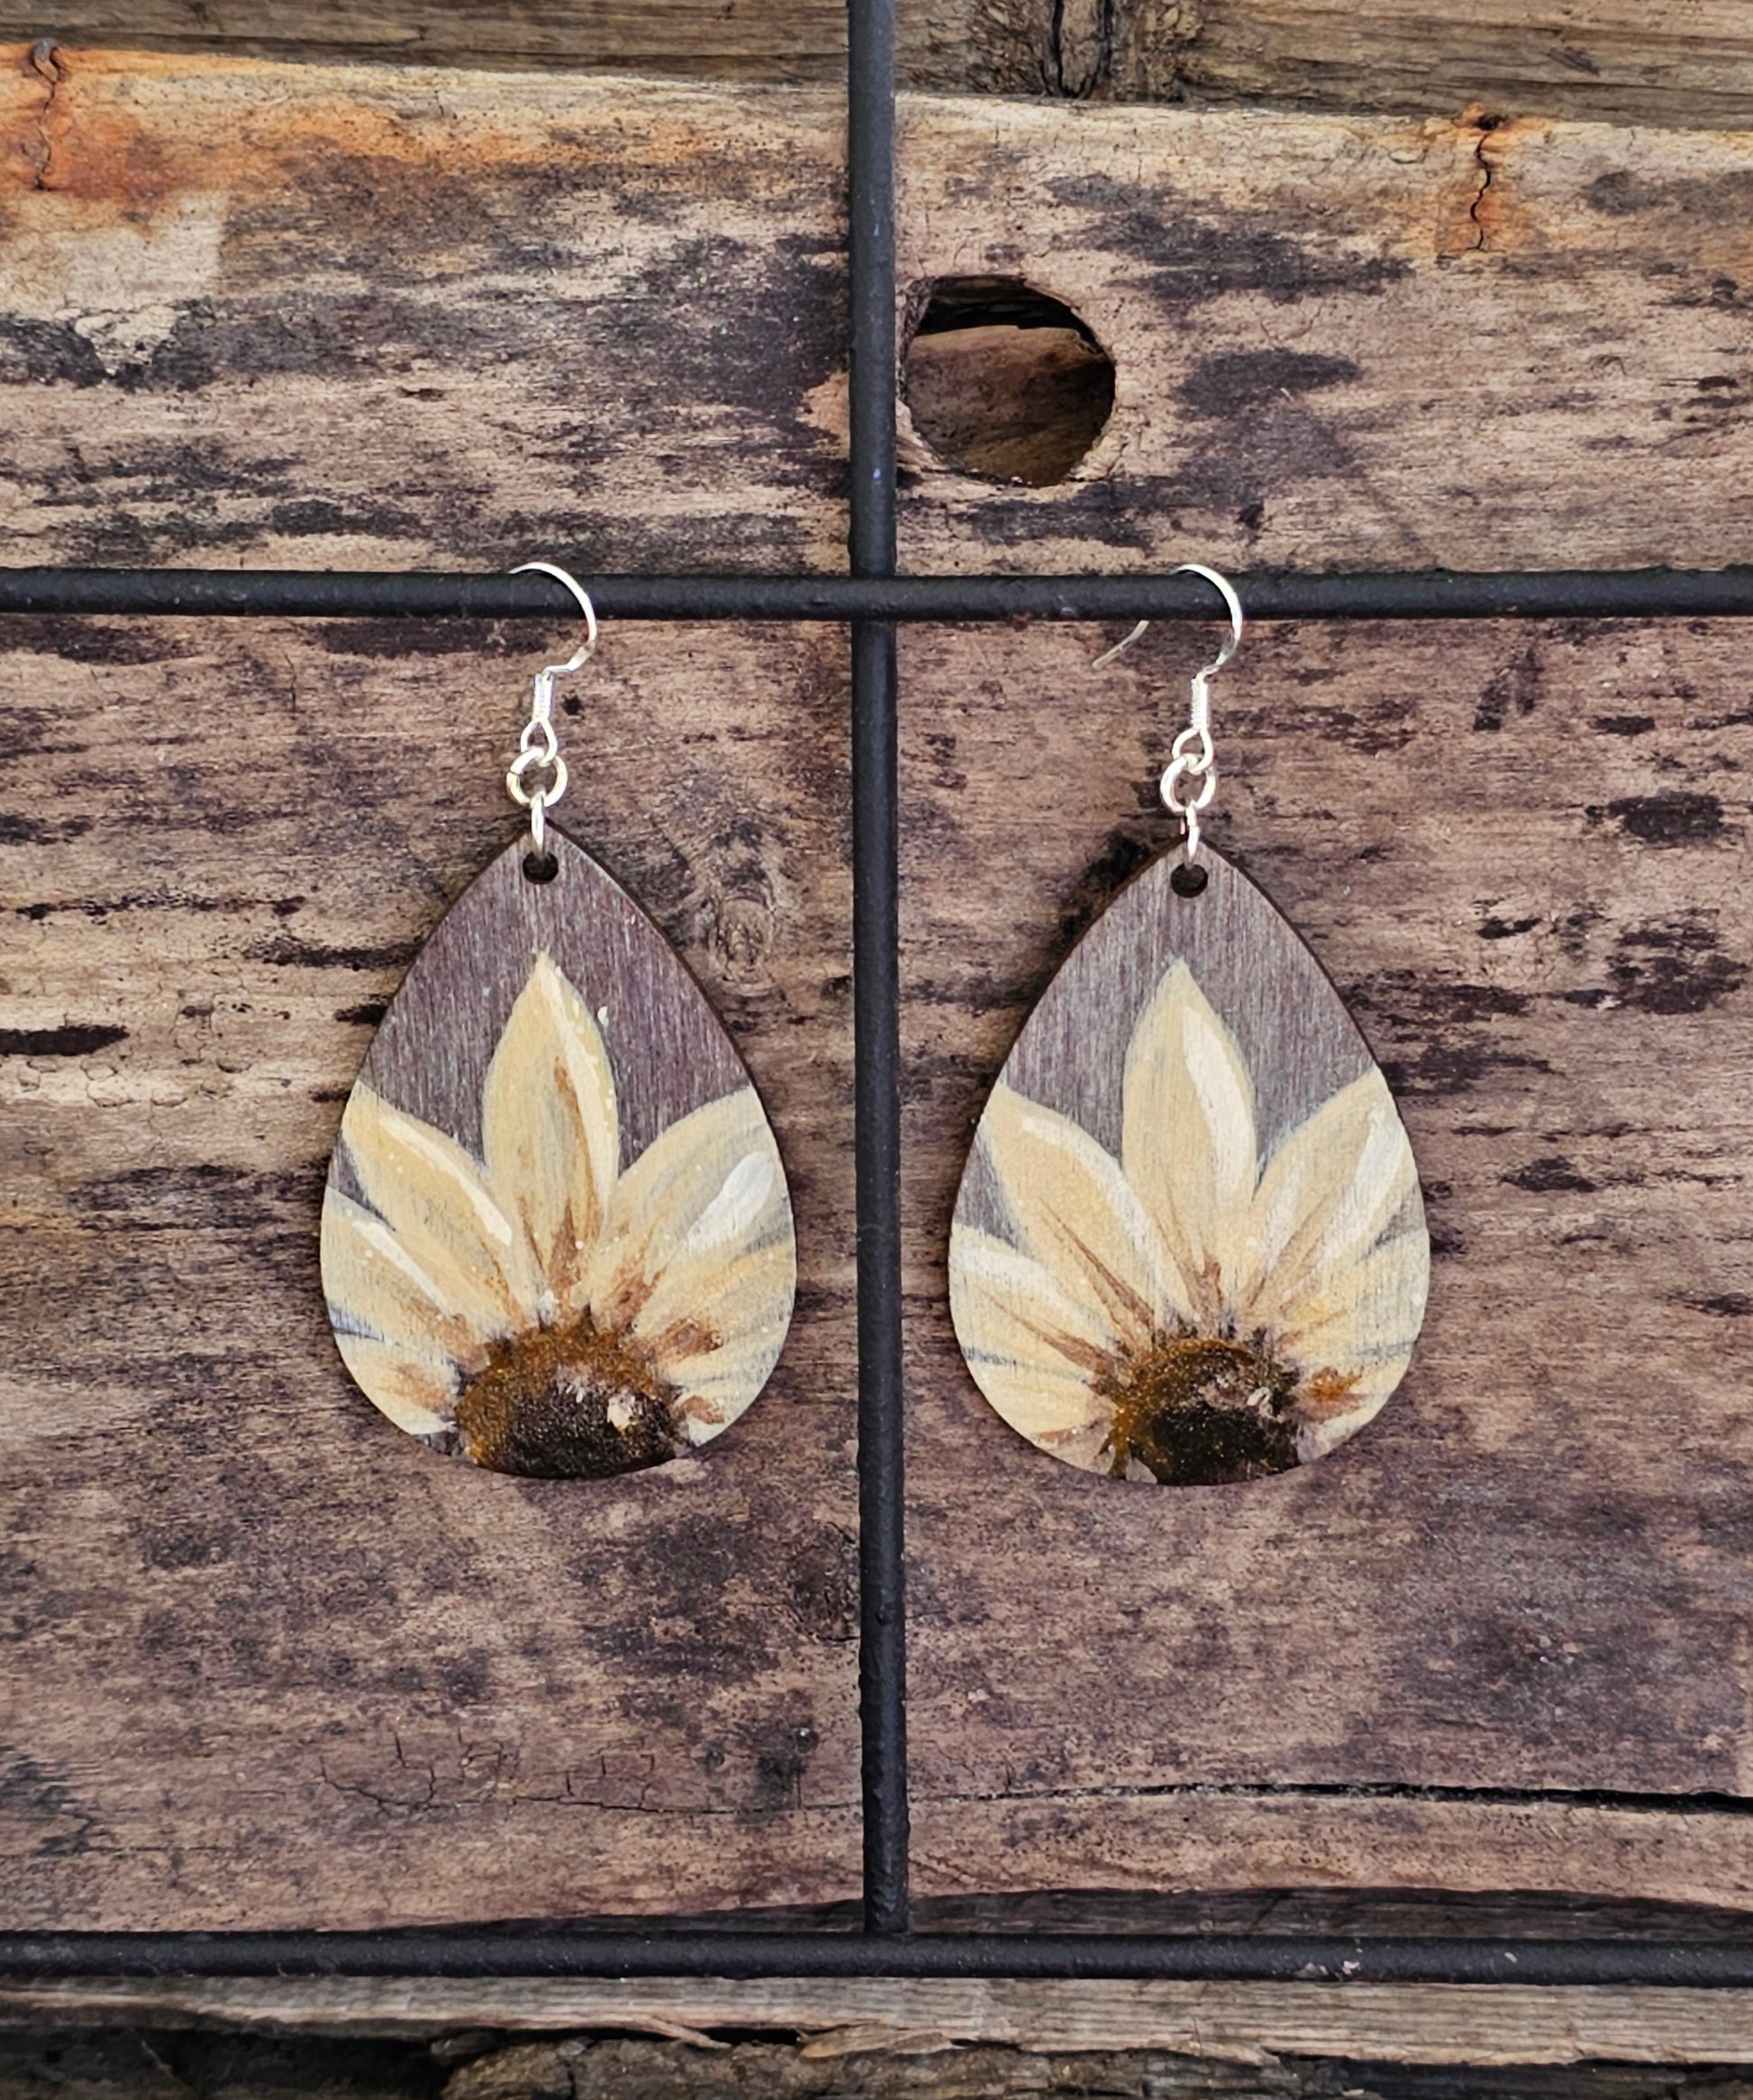 Hand Painted Ultra Lightweight Wooden Earrings. Watercolor and Acrylic. Gray washed painted background with Natural Cream Sunflower. Teardrop in shape. Back is painted in complimentary color. Sterling Silver Findings. Hangs 2 1/4" in Length